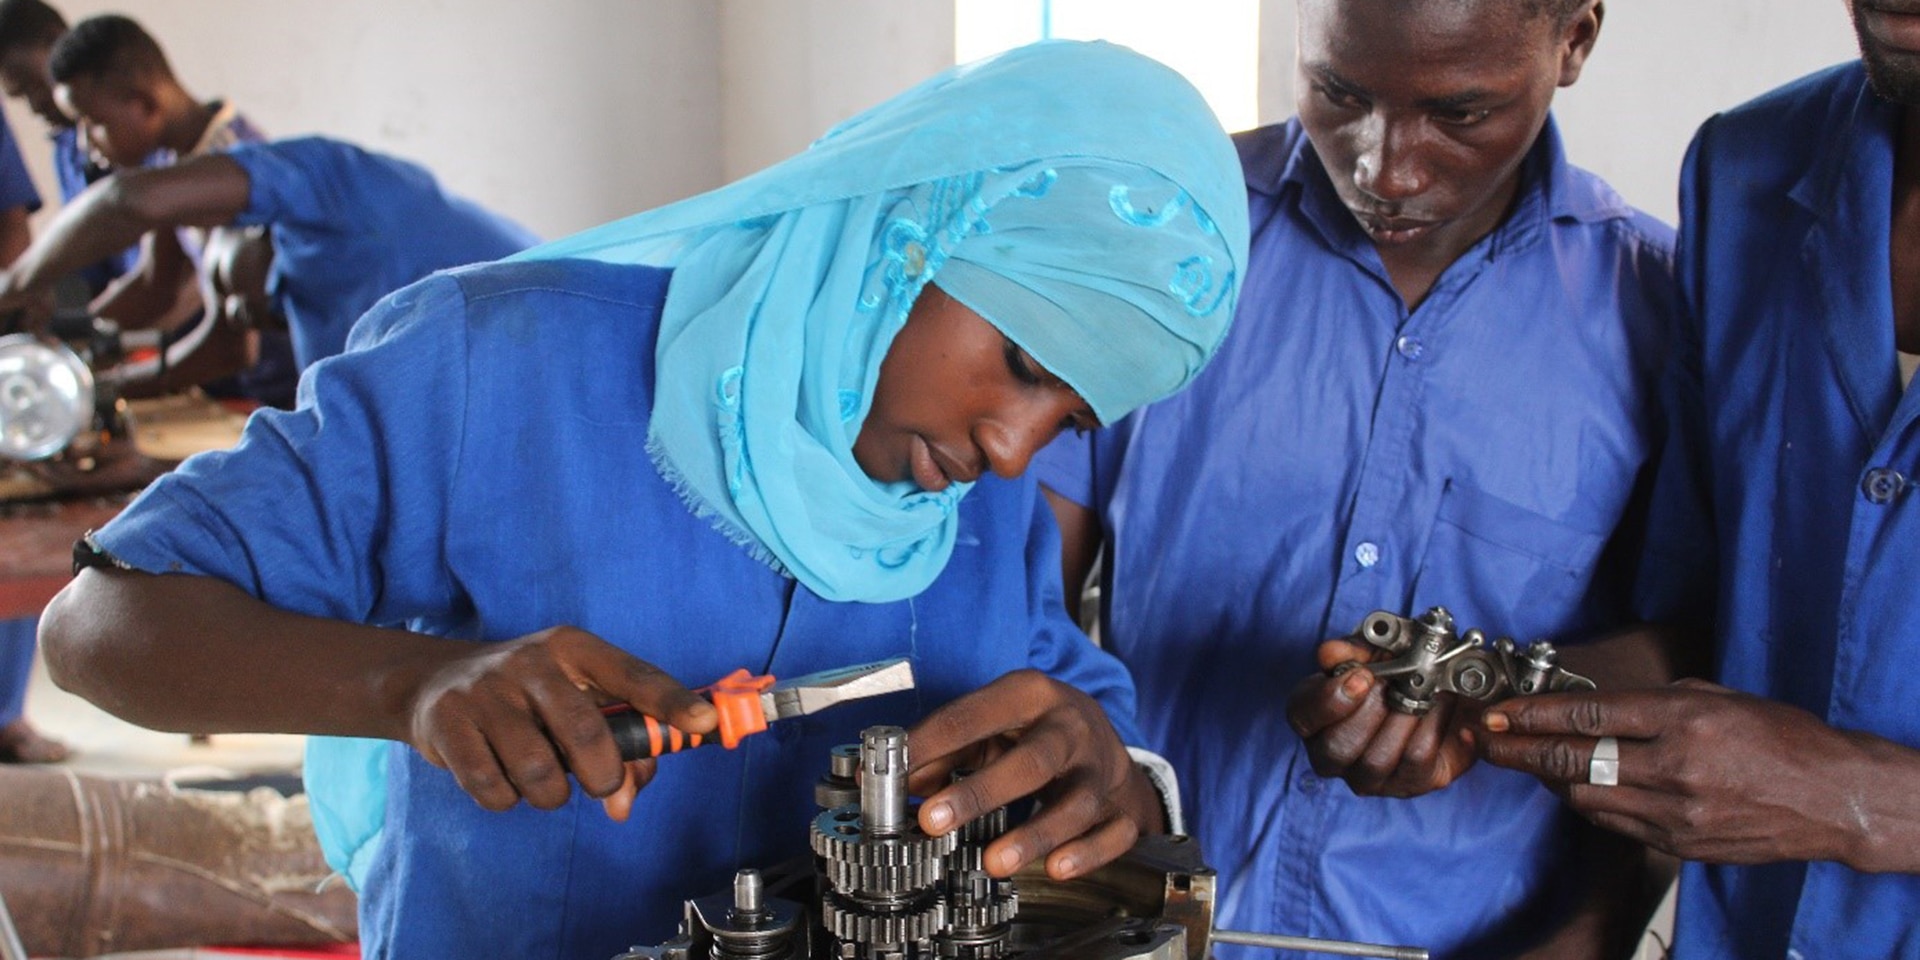 In a training workshop, a young woman with a head covering works on a mechanical component, observed by two male apprentices.